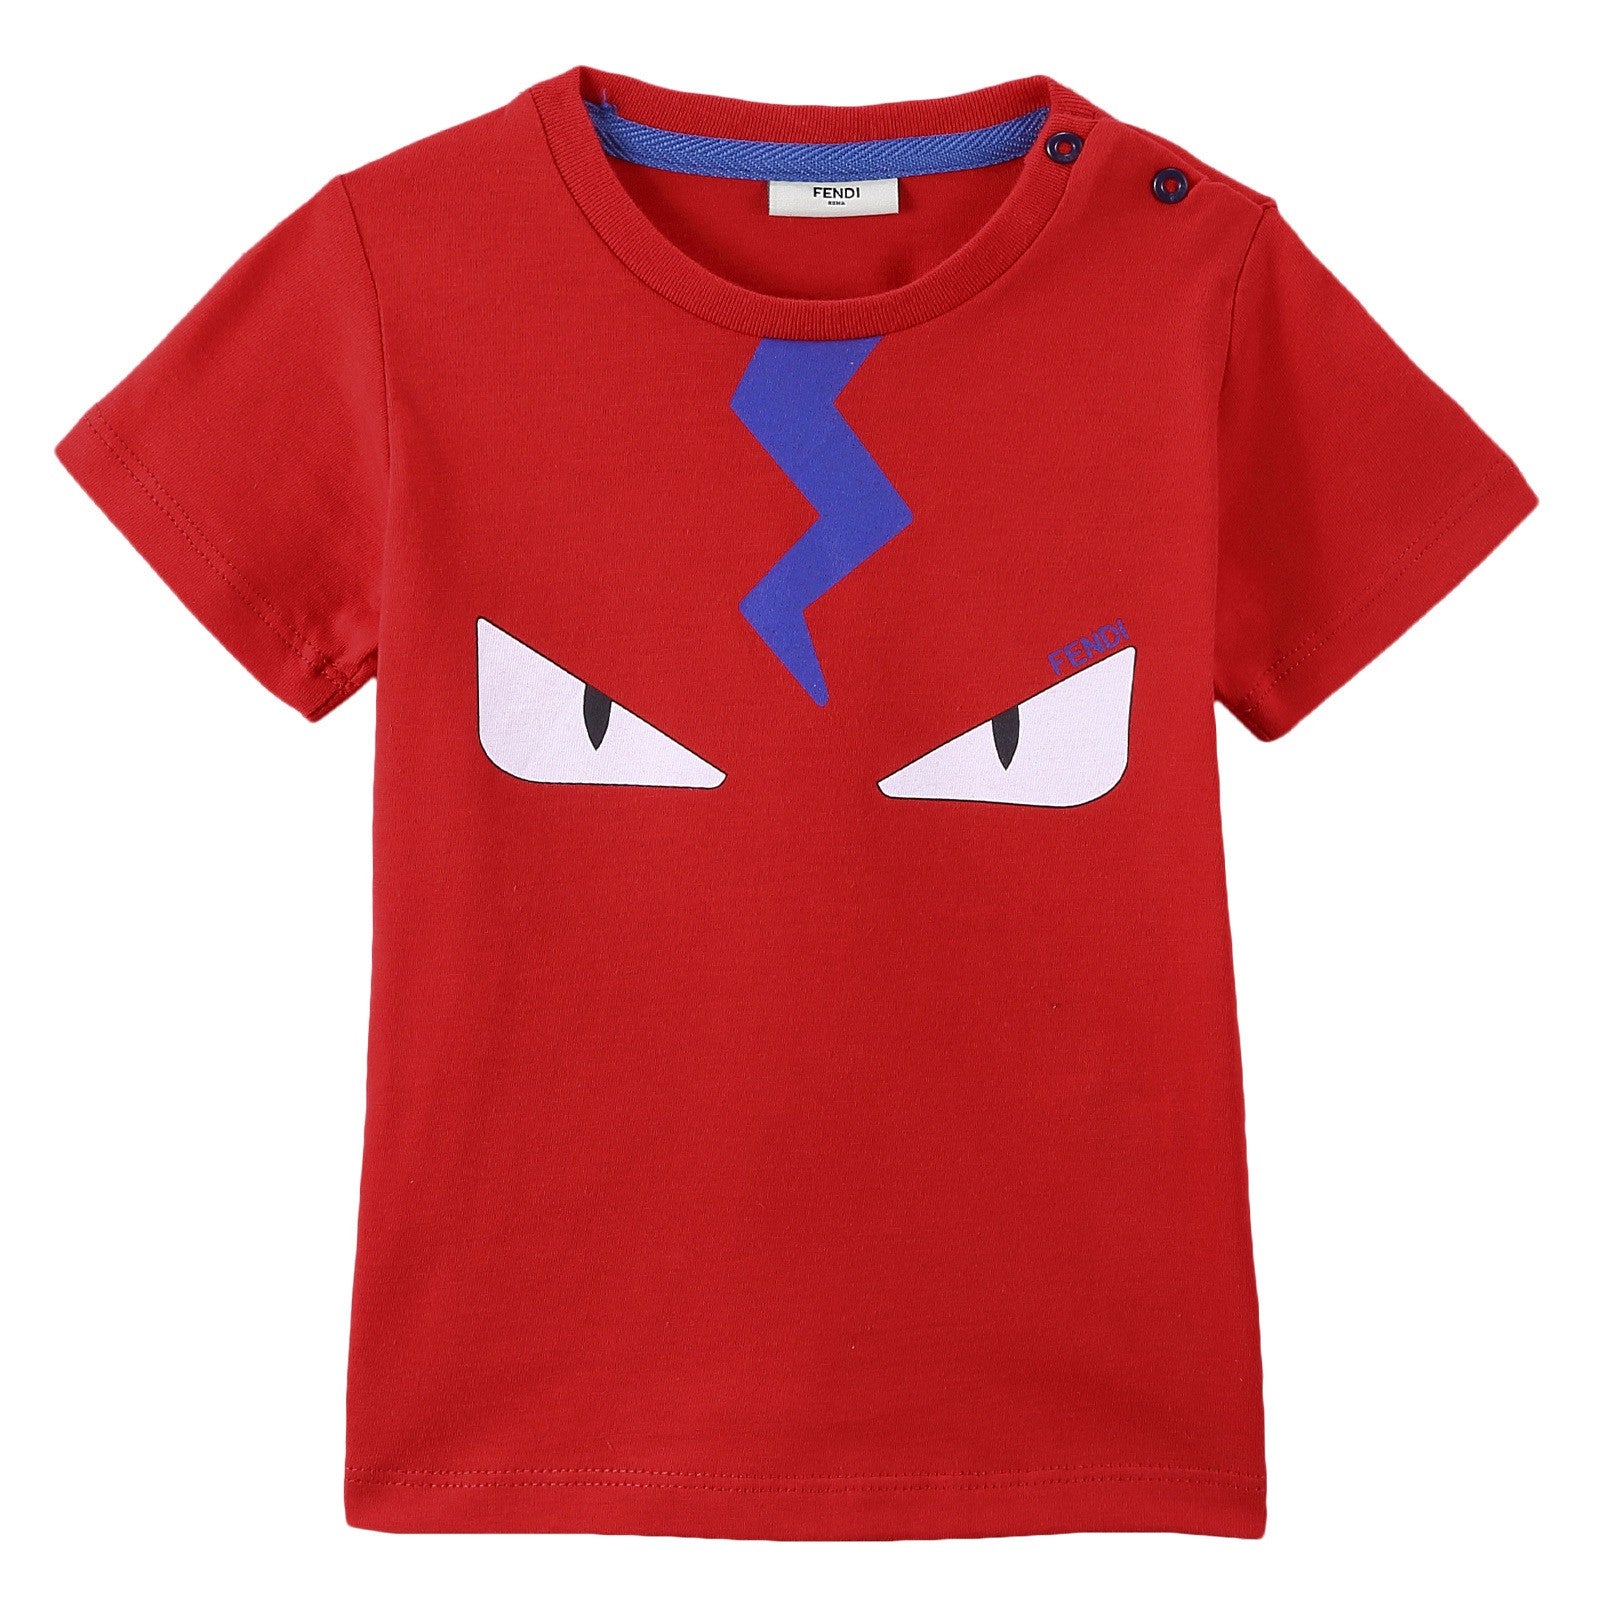 Baby Boys Red Cotton 'Monster' Printed T-Shirt - CÉMAROSE | Children's Fashion Store - 1